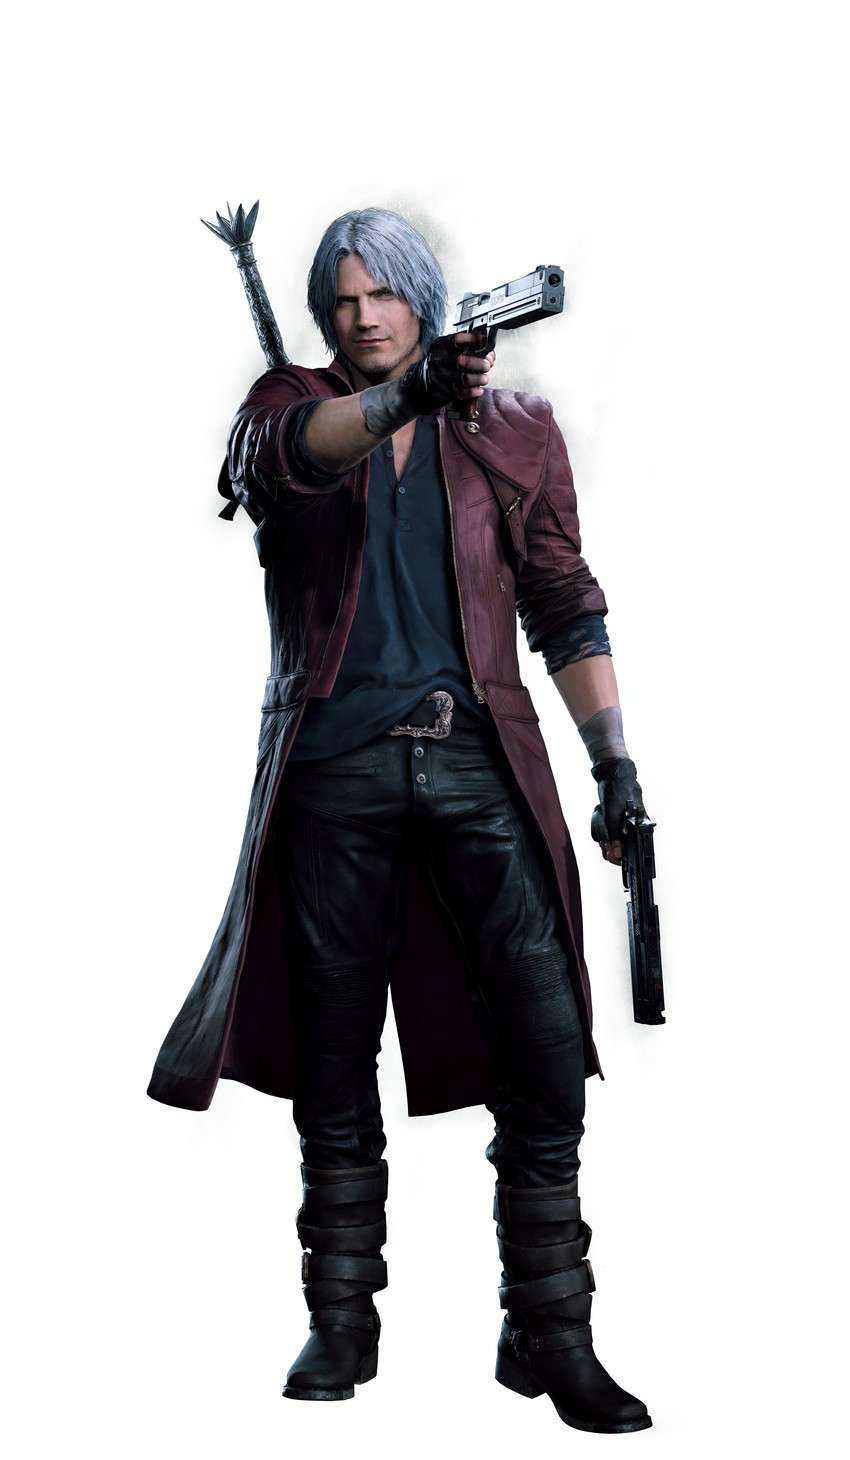 Dante (Devil May Cry), Devil May Cry, Devil May Cry 5, frontal